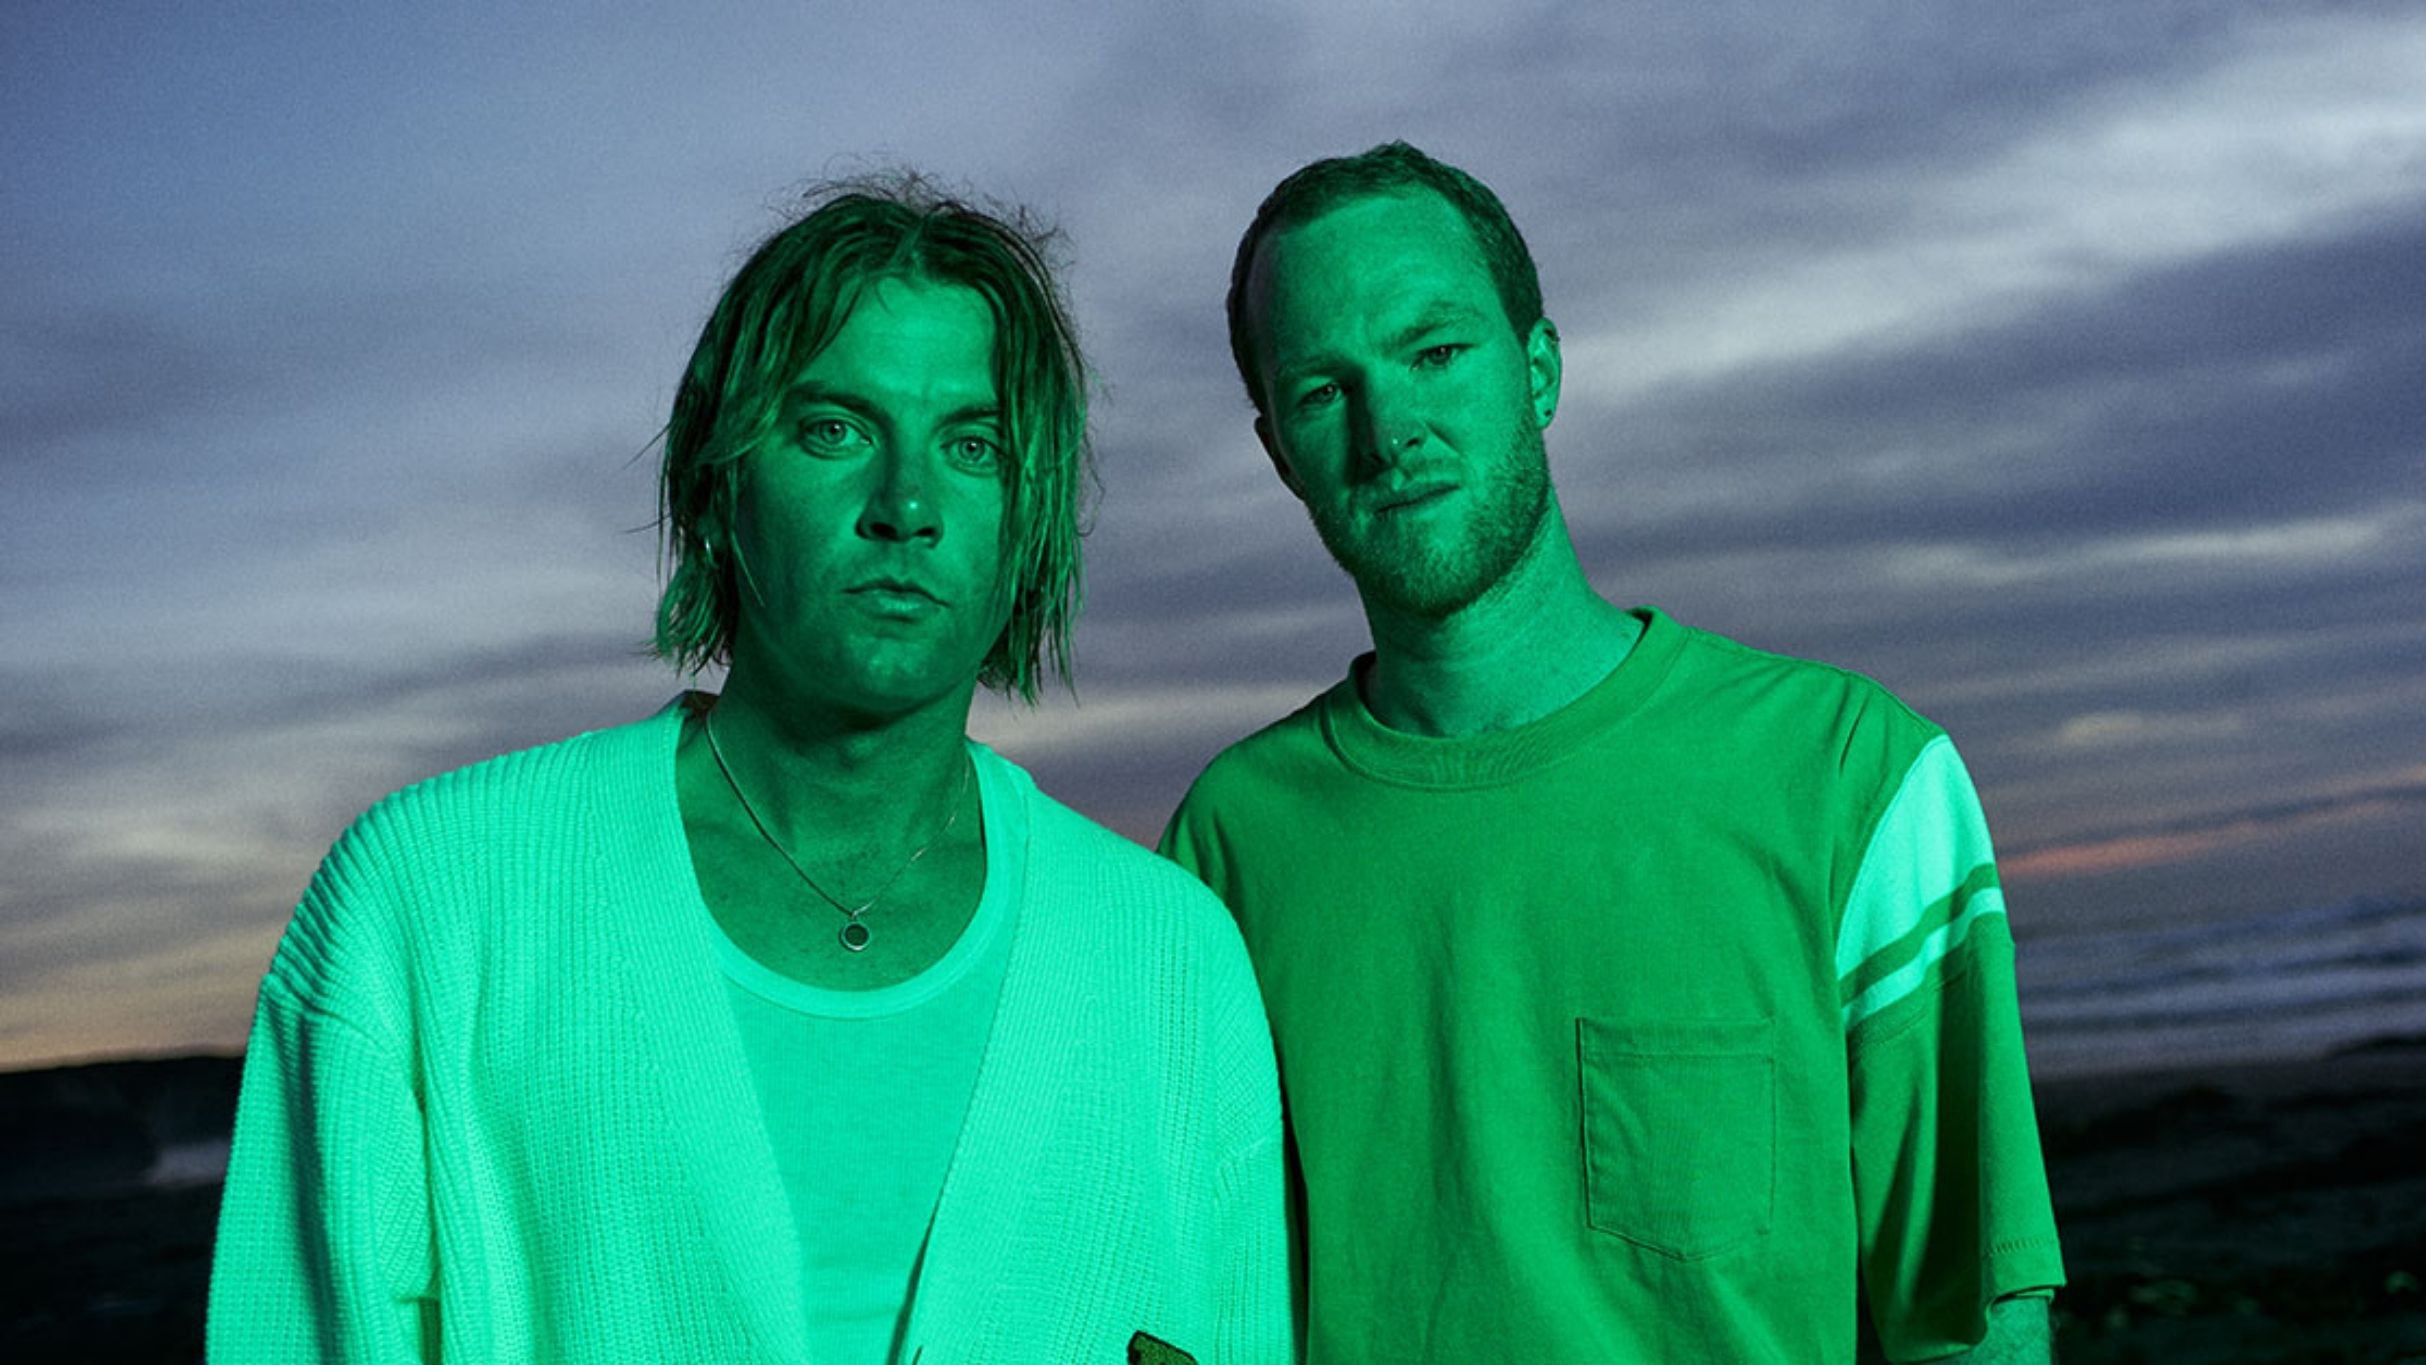 Judah & the Lion - The Process Tour presale c0de for event tickets in Silver Spring, MD (The Fillmore Silver Spring)